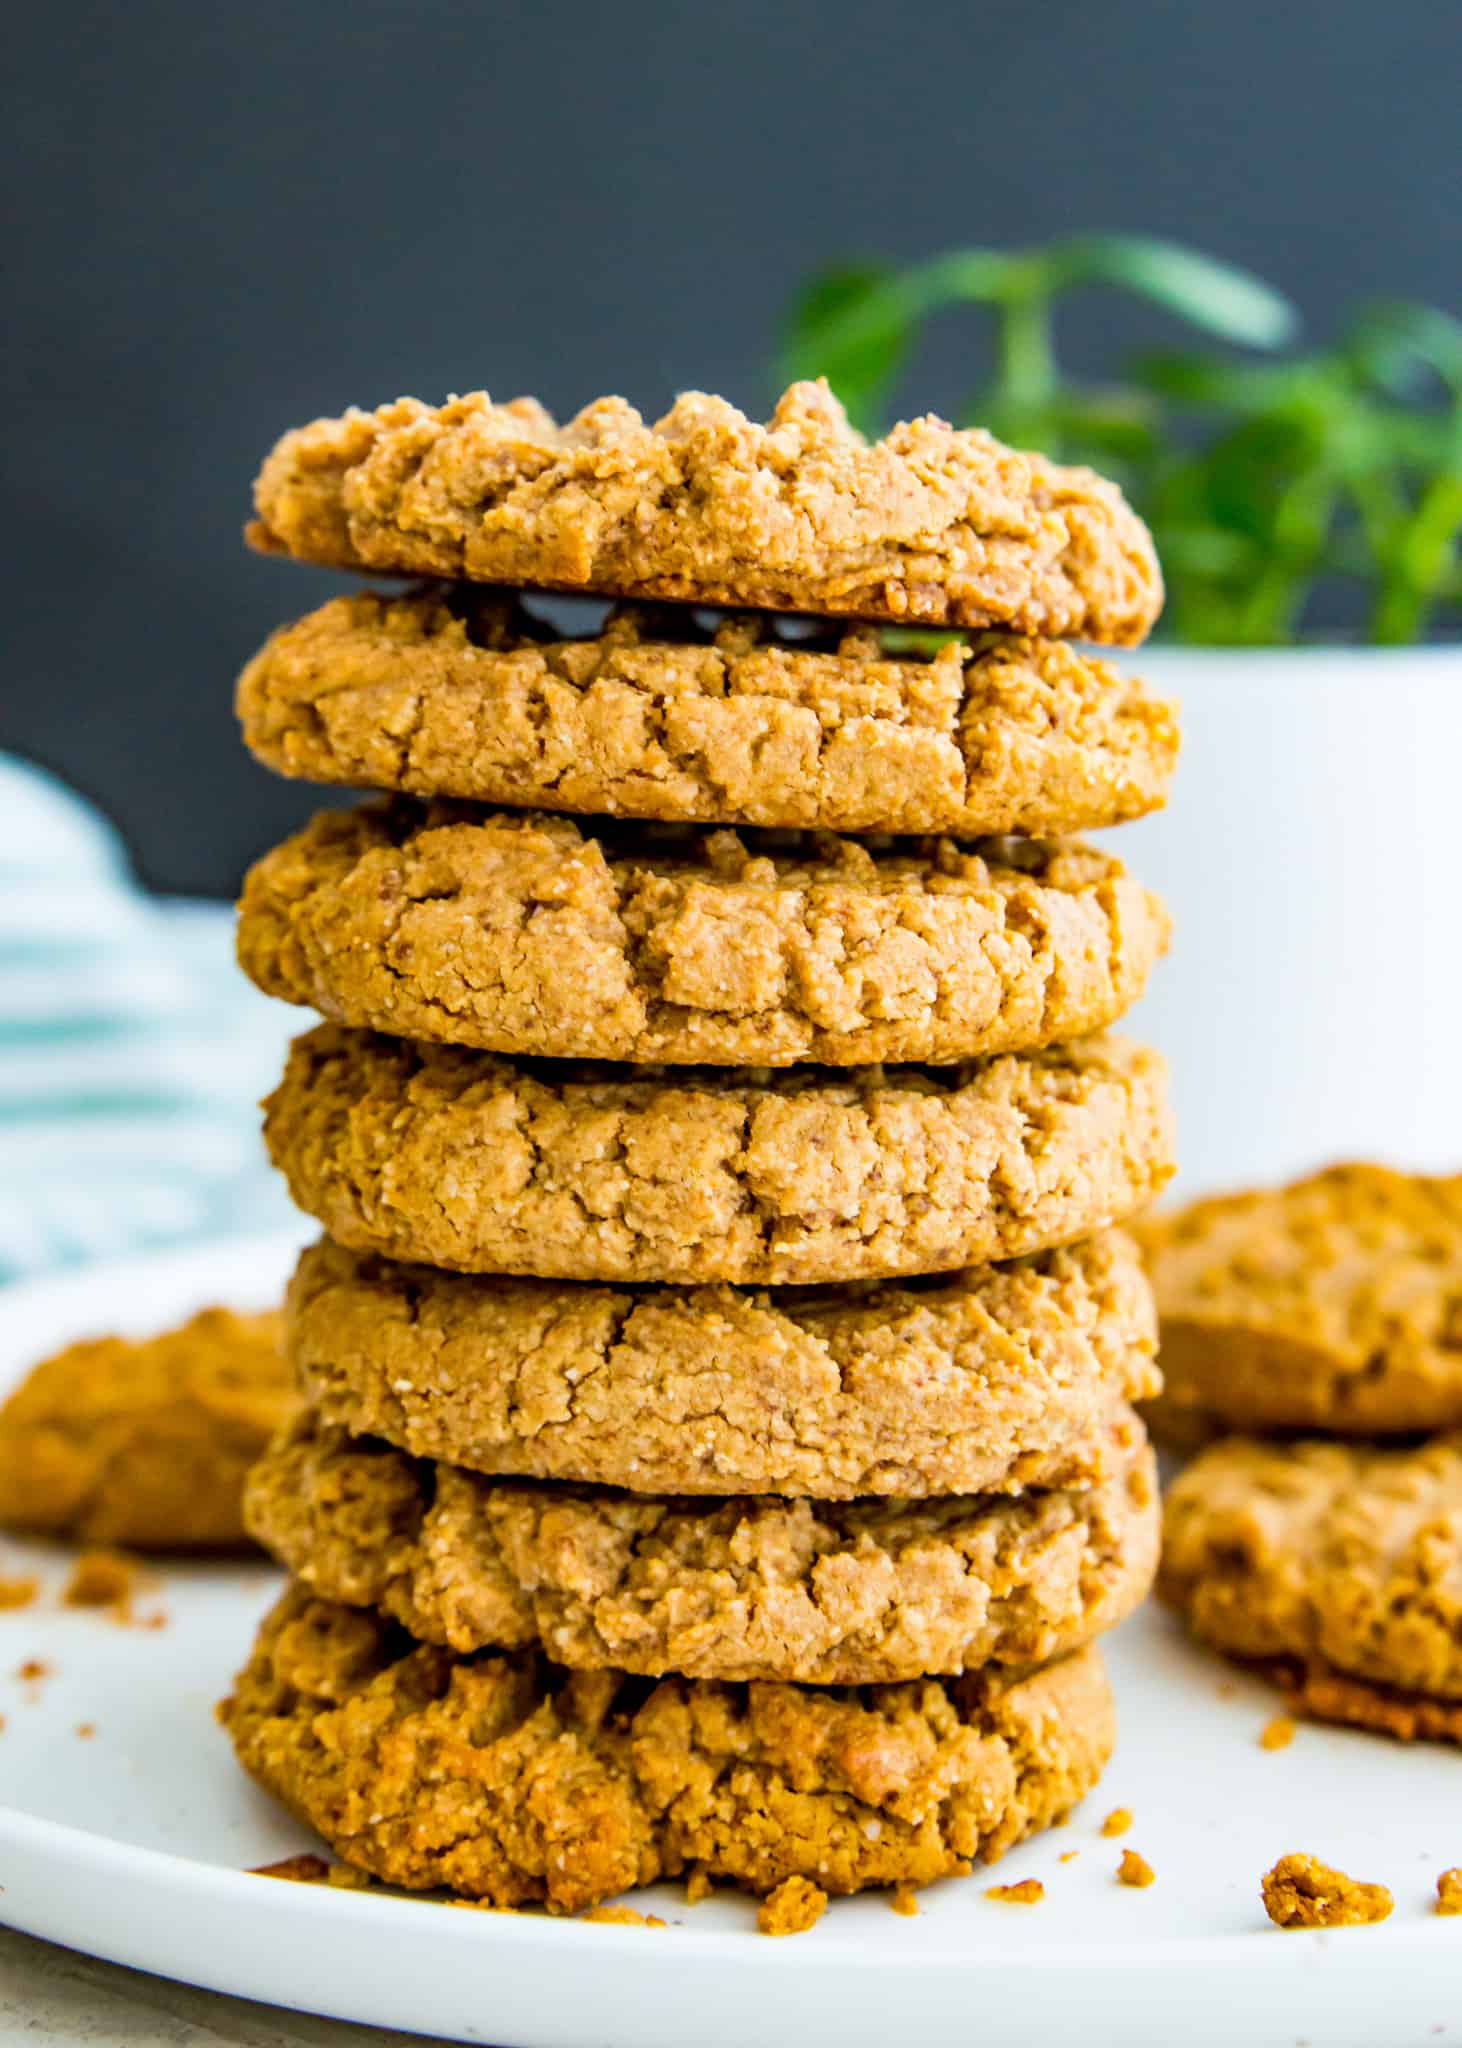 A stack of peanut butter cookies made with almond flour.